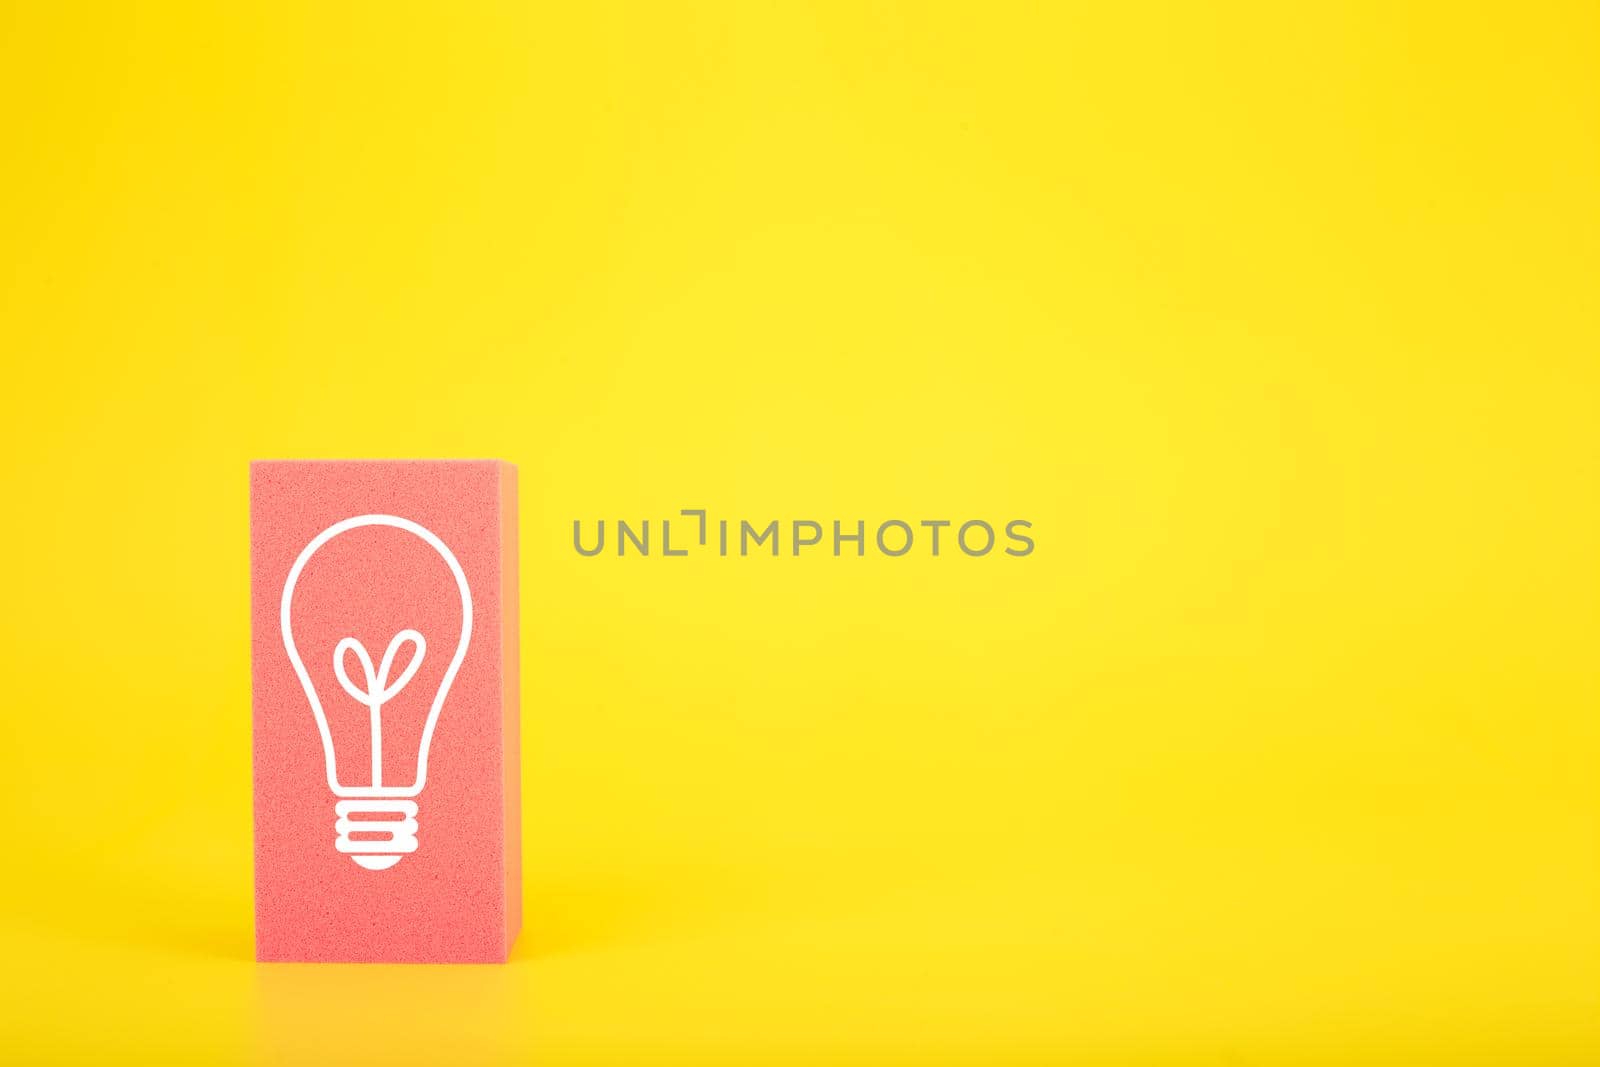 Concept of idea, creativity, start up or brainstorming. White drawn light bulb on pink rectangle against yellow background with copy space